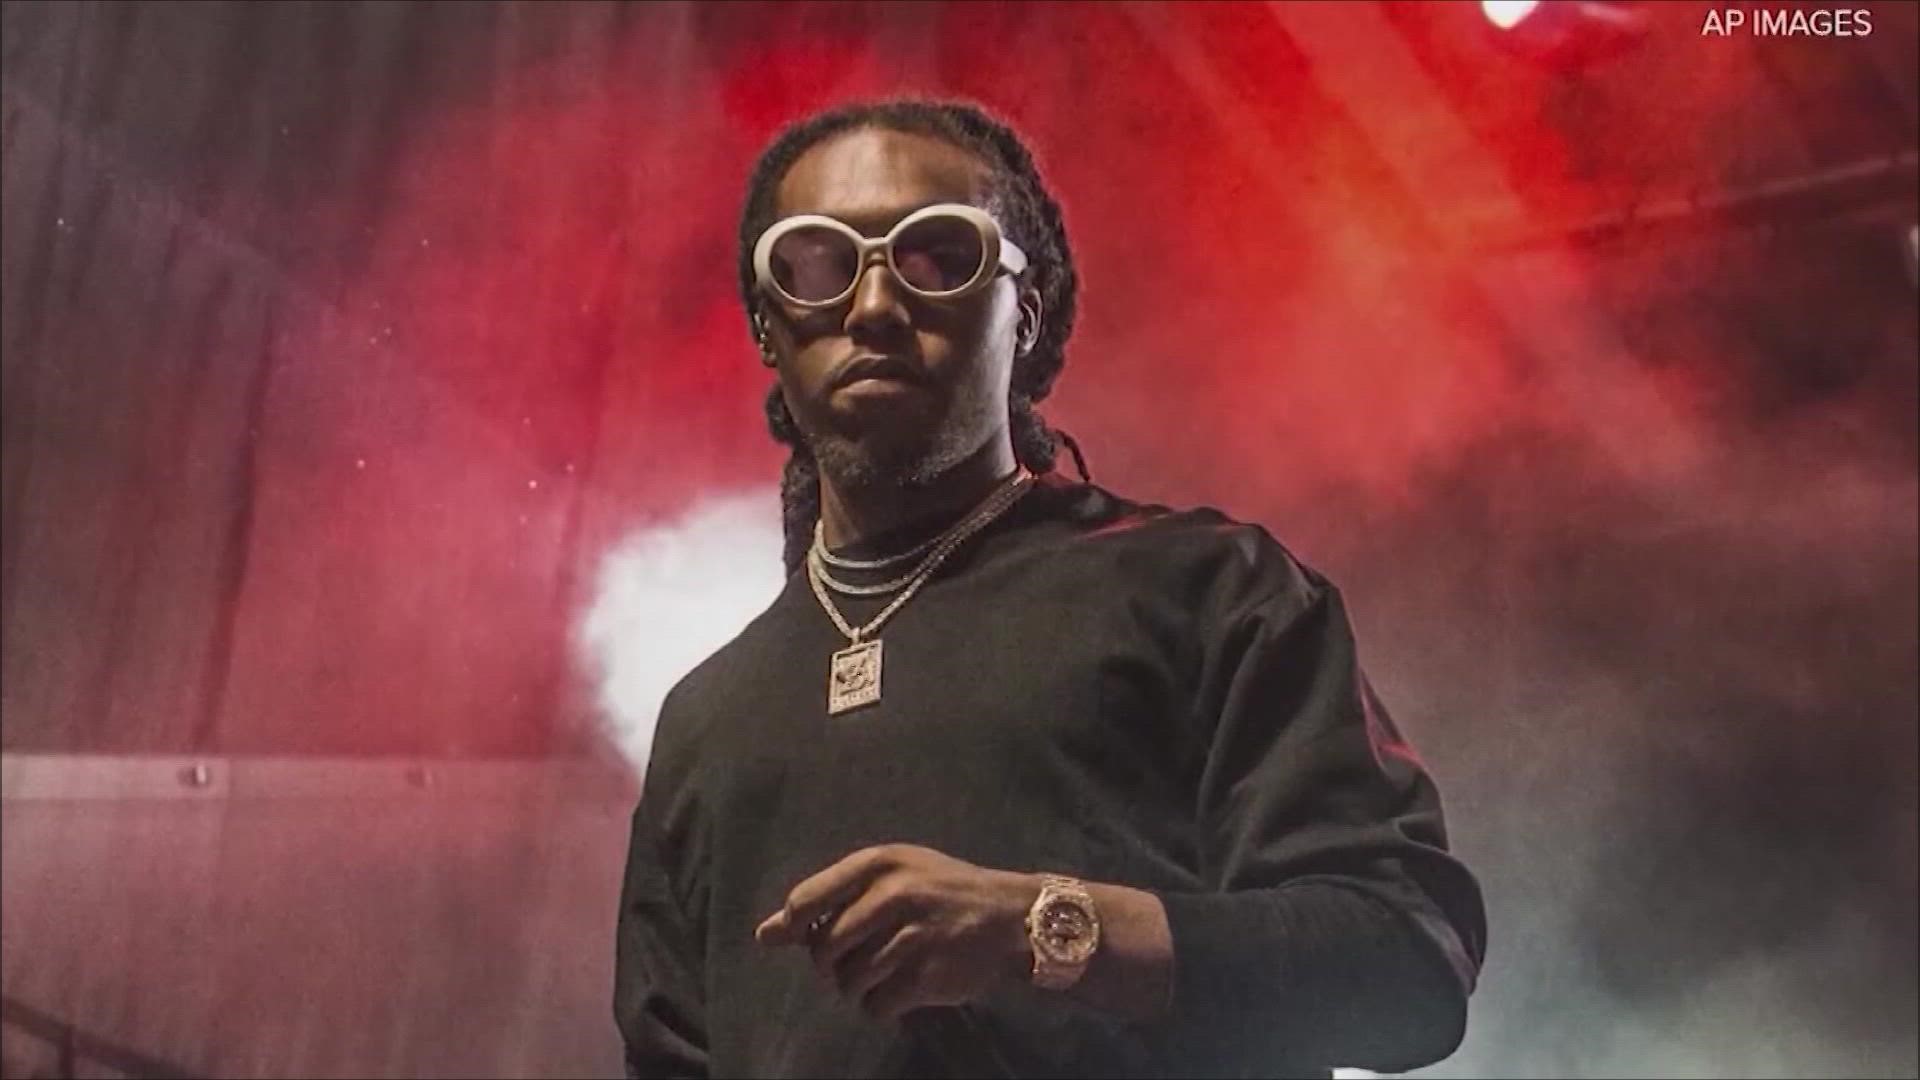 Police said the Migos rapper was an innocent bystander when he was shot outside of a Houston bowling alley. Patrick Xavier Clark was the second person arrested.